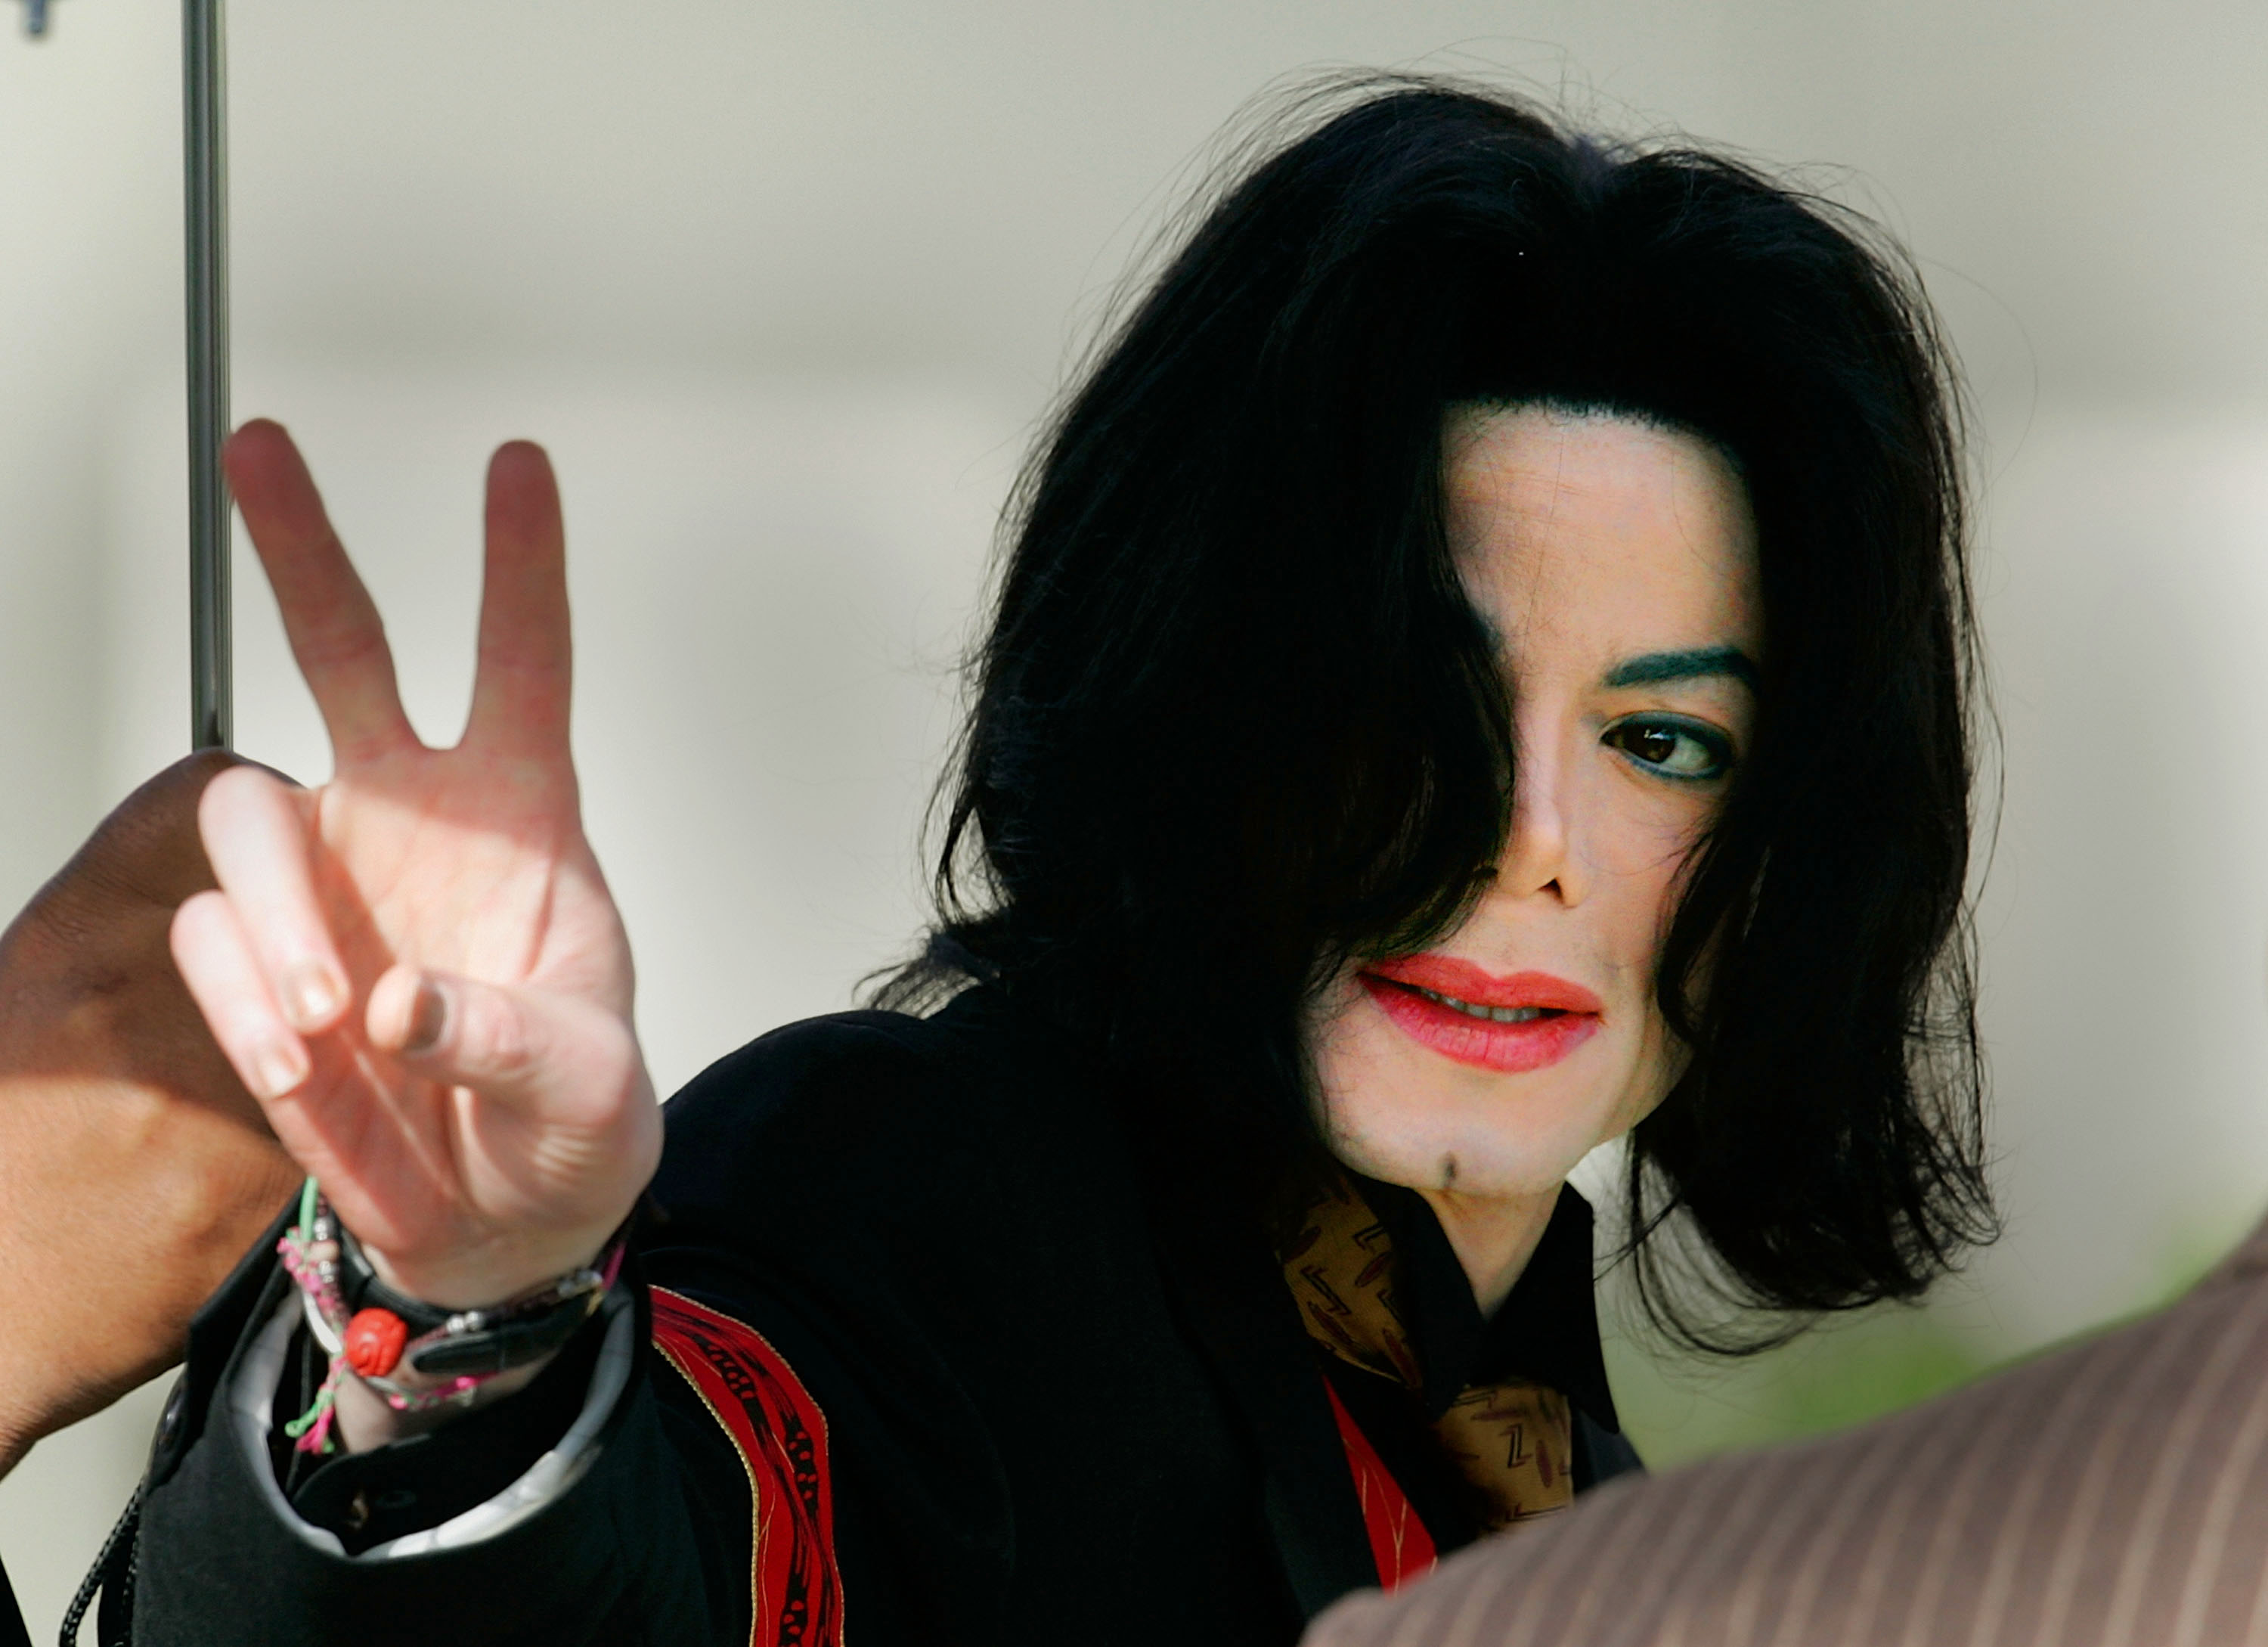 Michael Jackson seen on May 6, 2005 in Santa Maria, California | Source: Getty Images